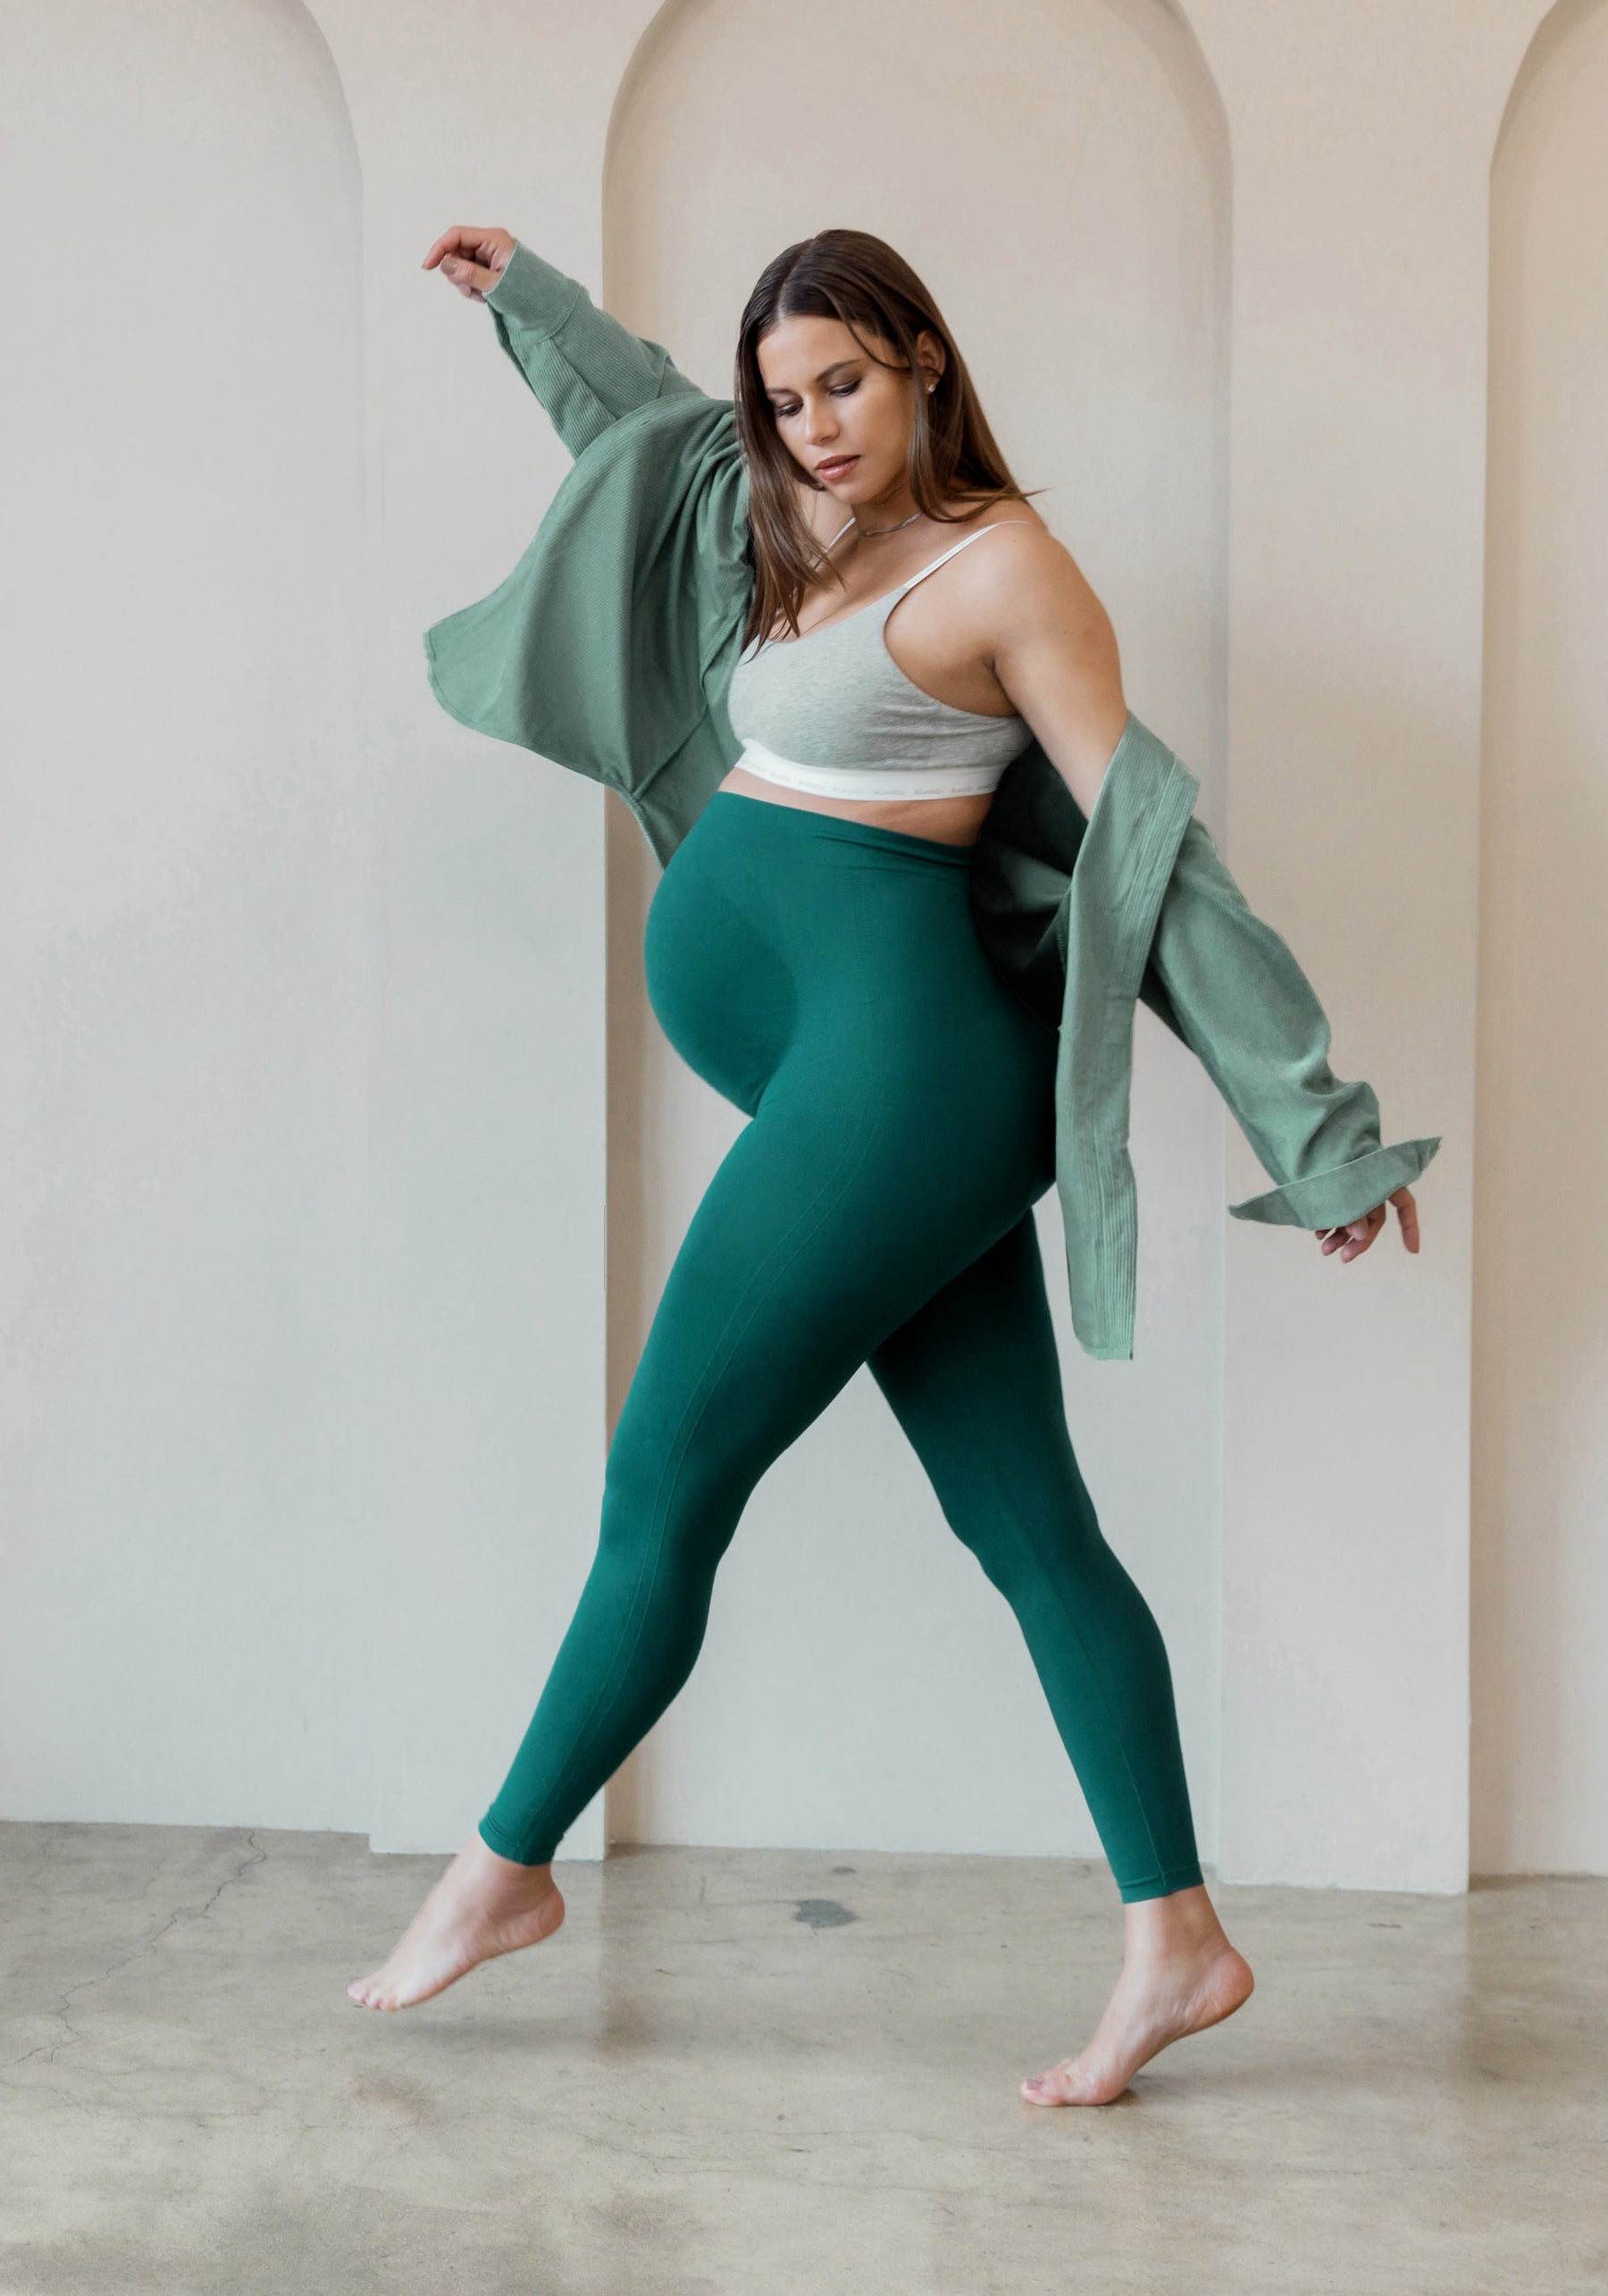 BLANQI - “Pregnant, but make it chic. Gonna live in these BLANQI